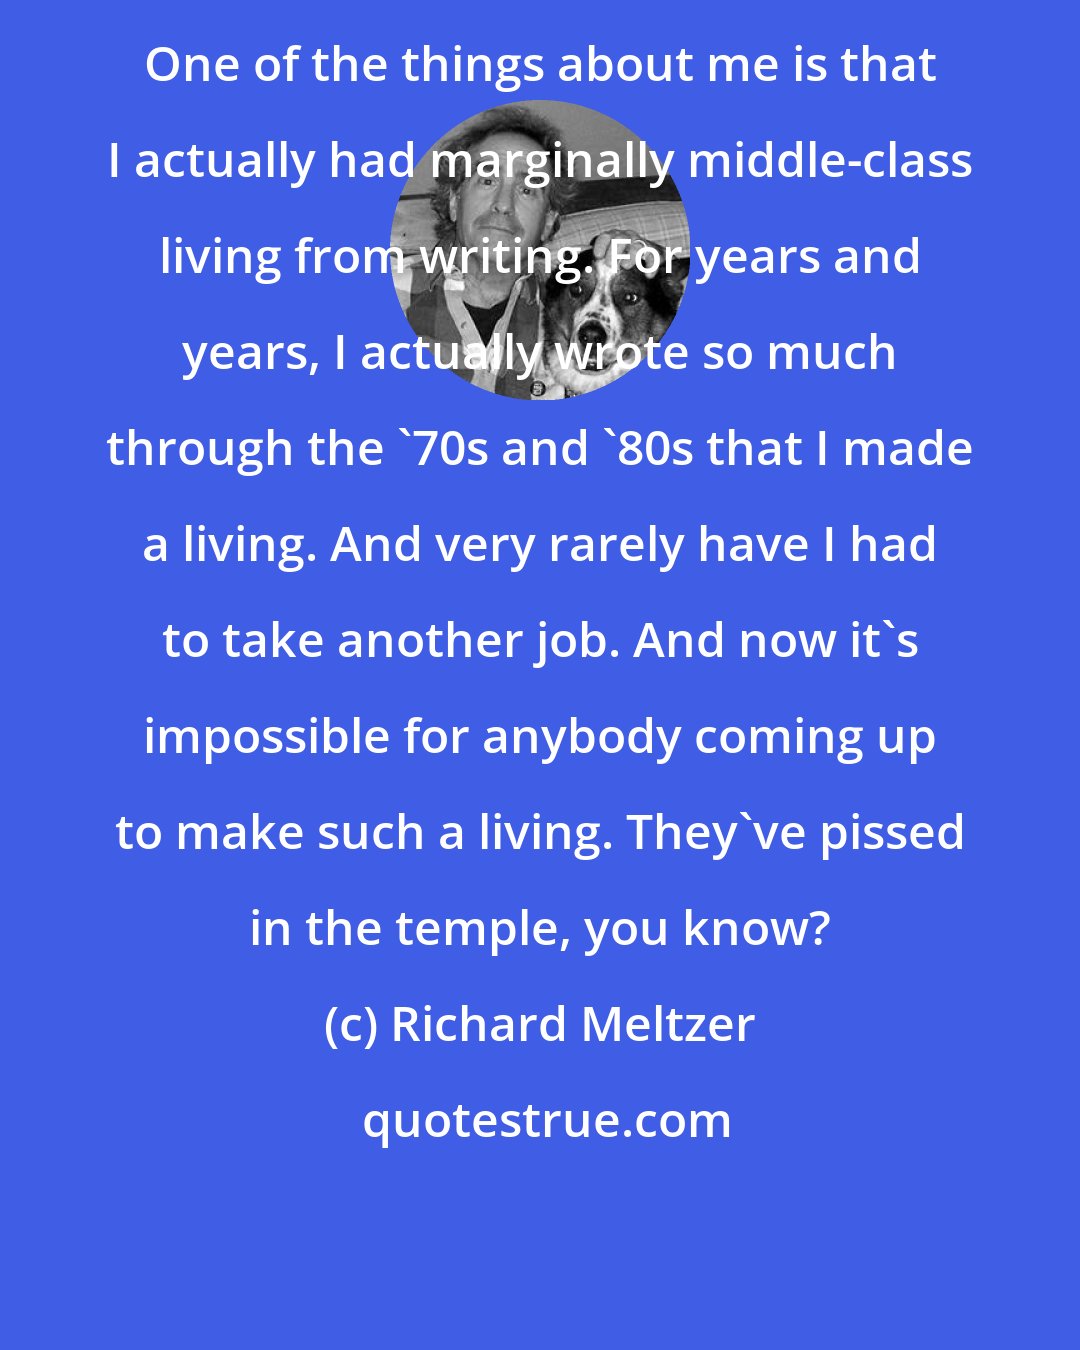 Richard Meltzer: One of the things about me is that I actually had marginally middle-class living from writing. For years and years, I actually wrote so much through the '70s and '80s that I made a living. And very rarely have I had to take another job. And now it's impossible for anybody coming up to make such a living. They've pissed in the temple, you know?